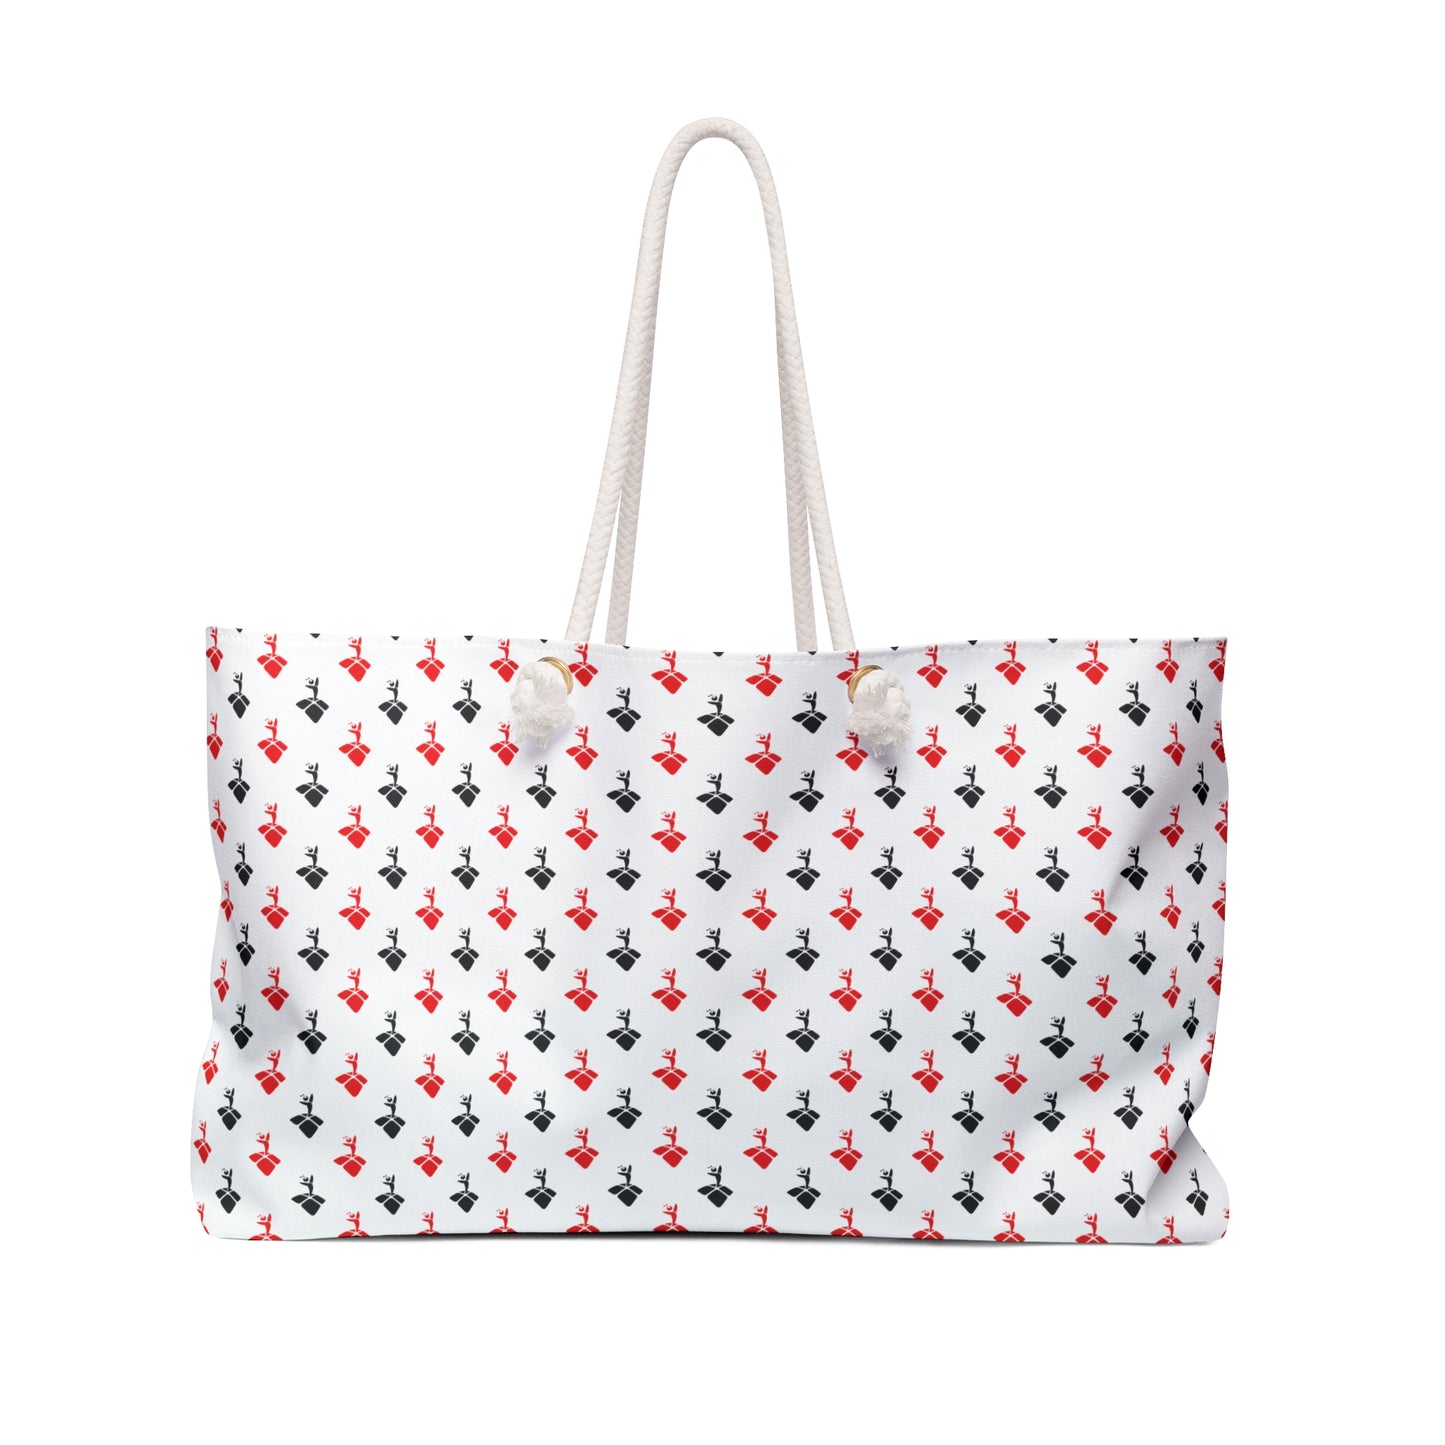 TBC ICONS RED AND BLACK PATTERN-Weekender Bag